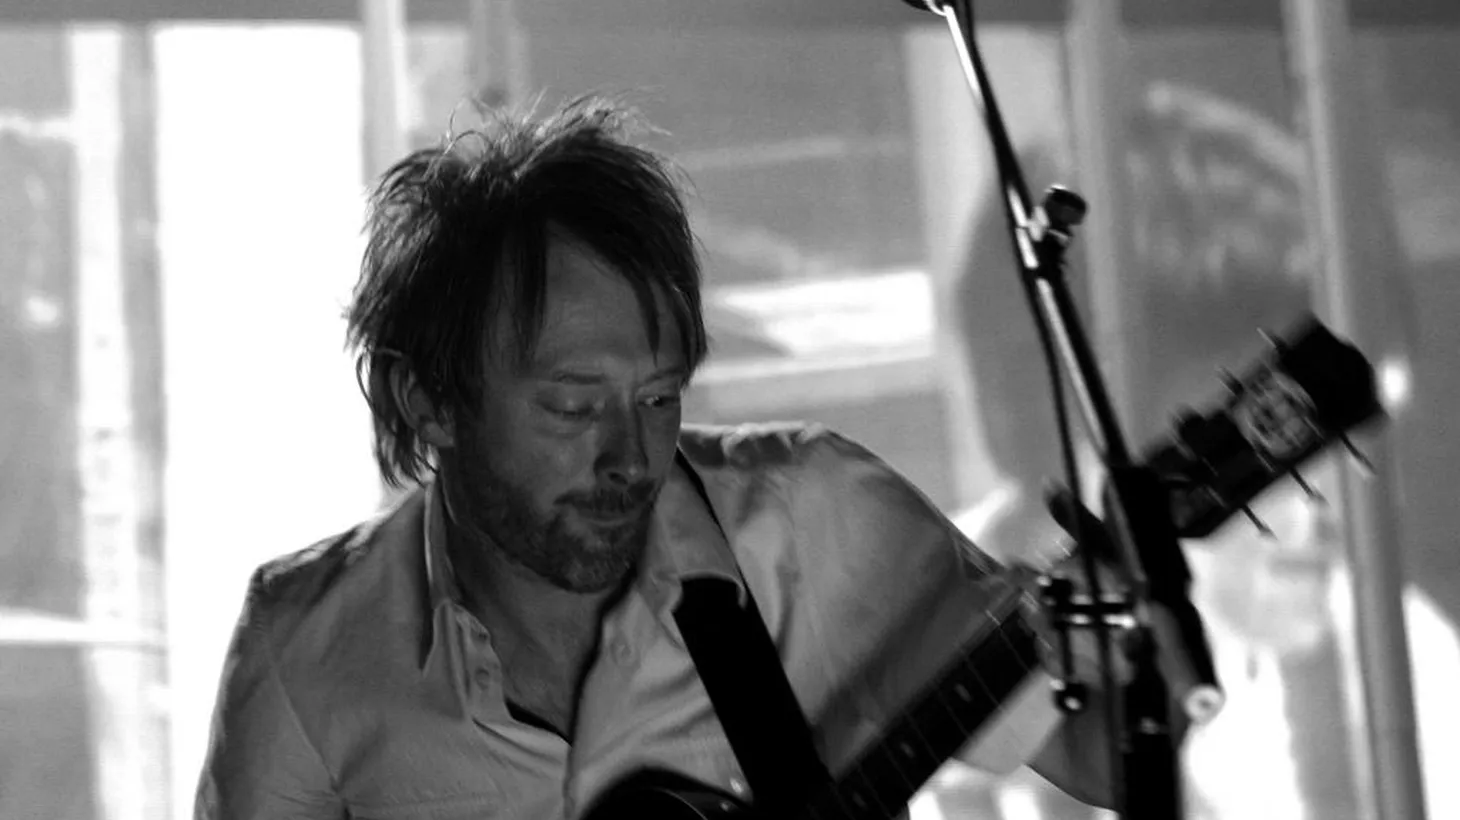 Thom Yorke and Jonny Greenwood of Radiohead join host Chris Douridas for a live performance and interview.